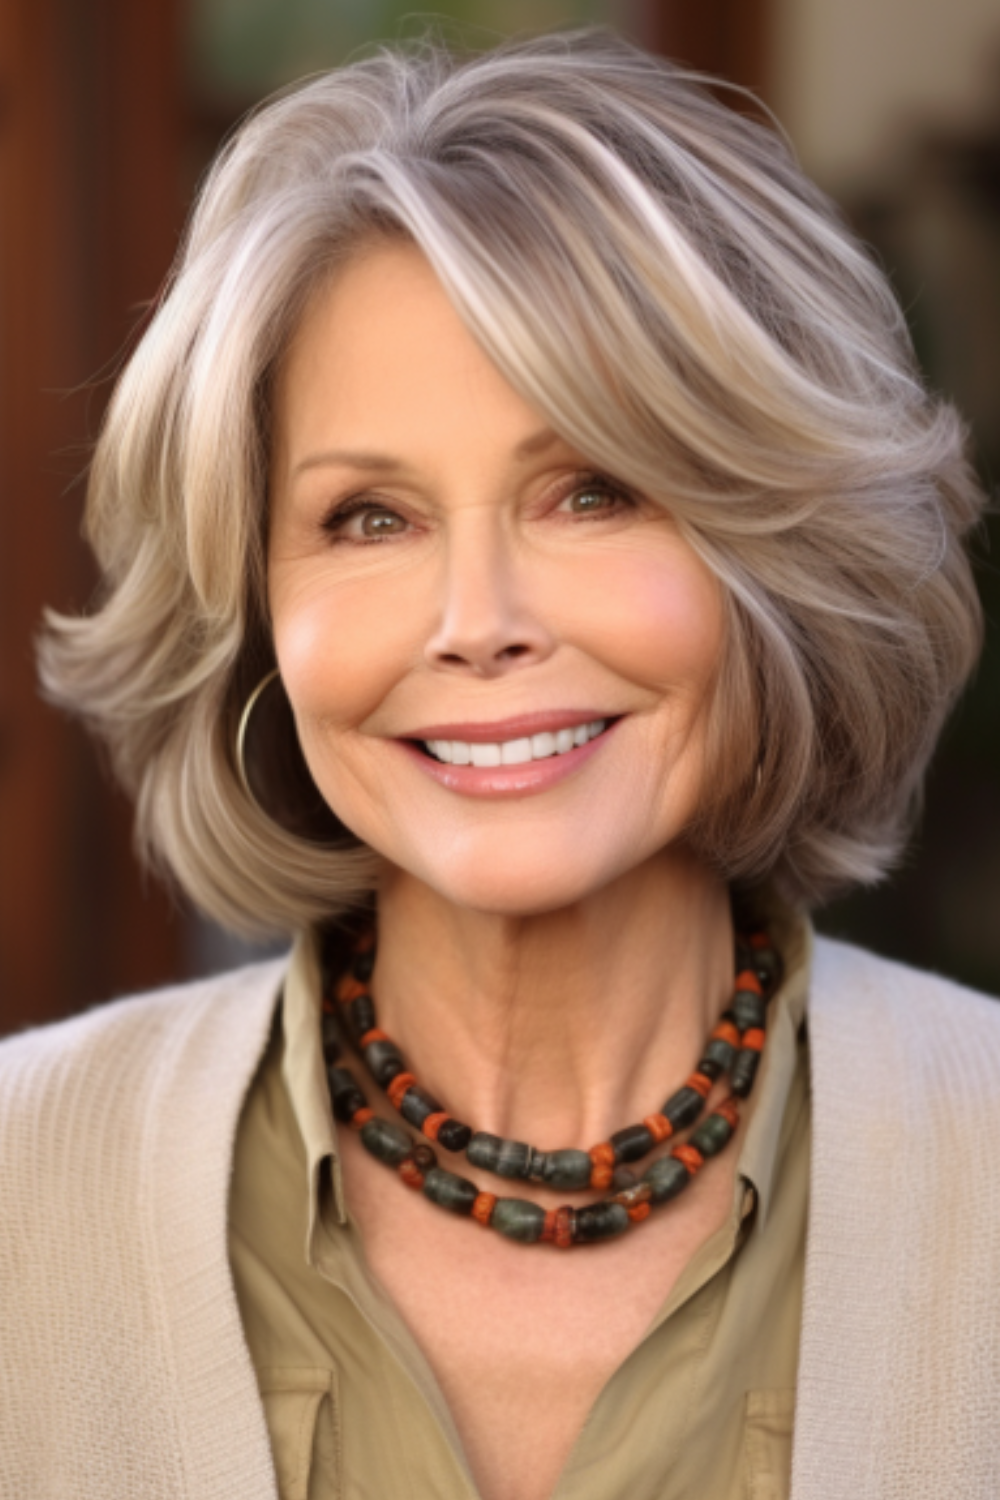 Chic and Stylish: Short Haircuts for Older Women